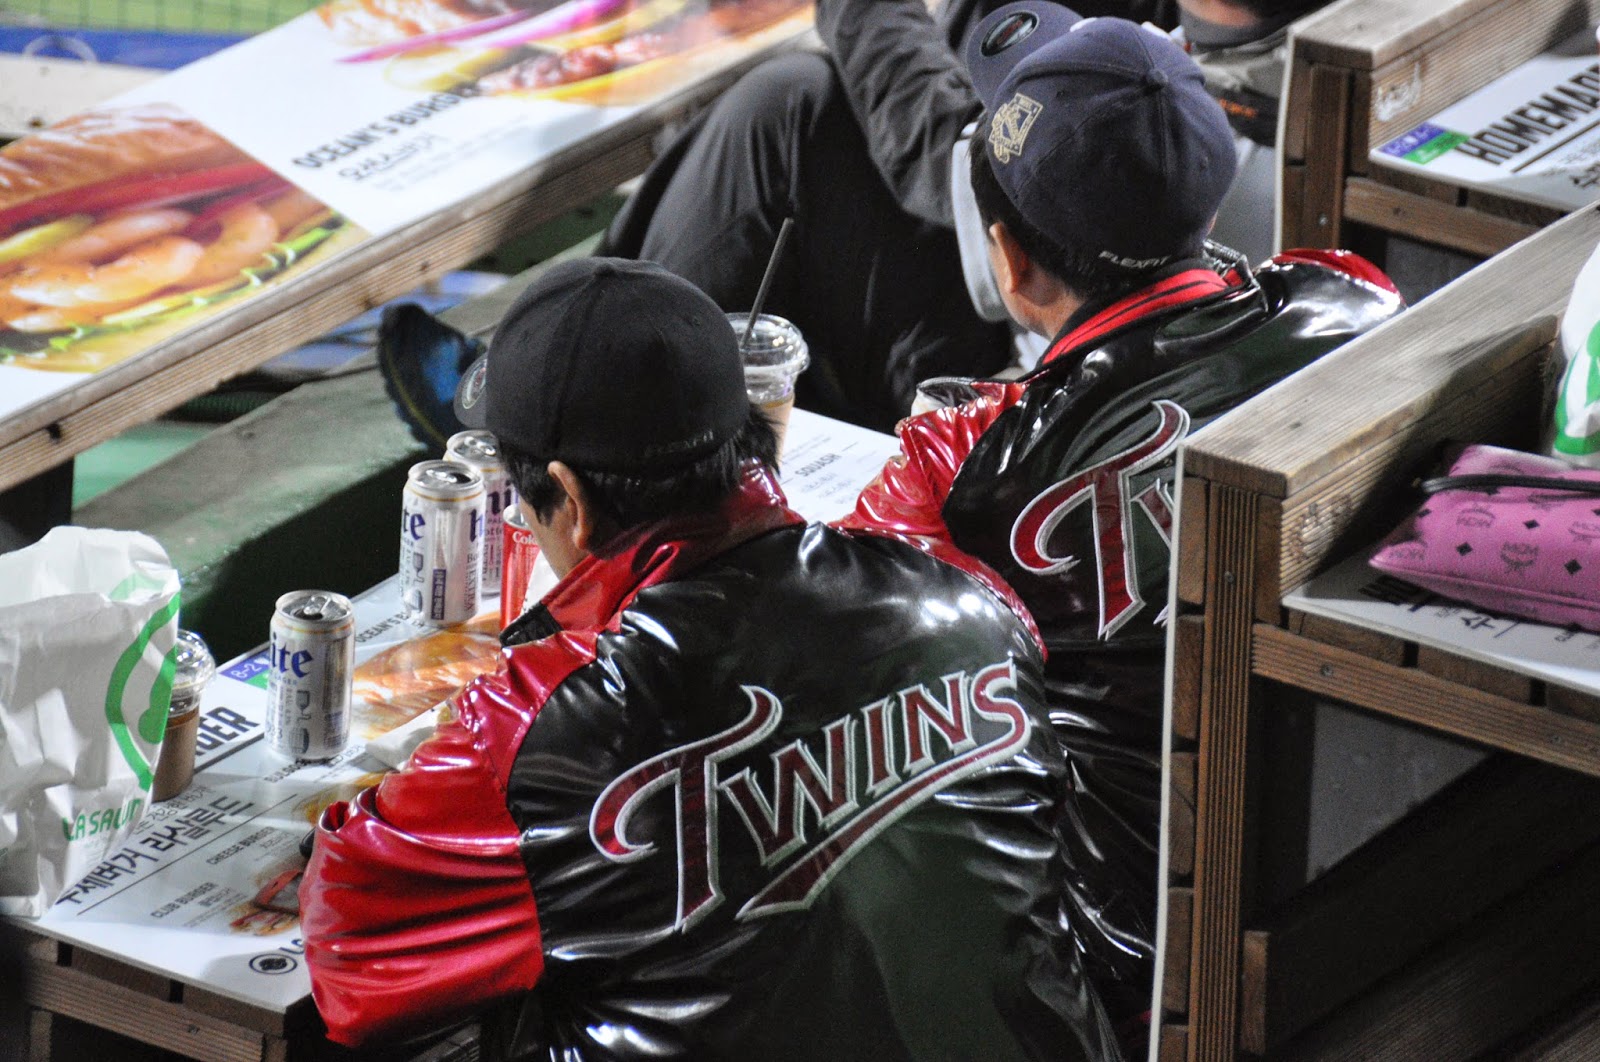 Why don't they sell these awesome, eighties-inspired Twins jackets in Minnesota?!